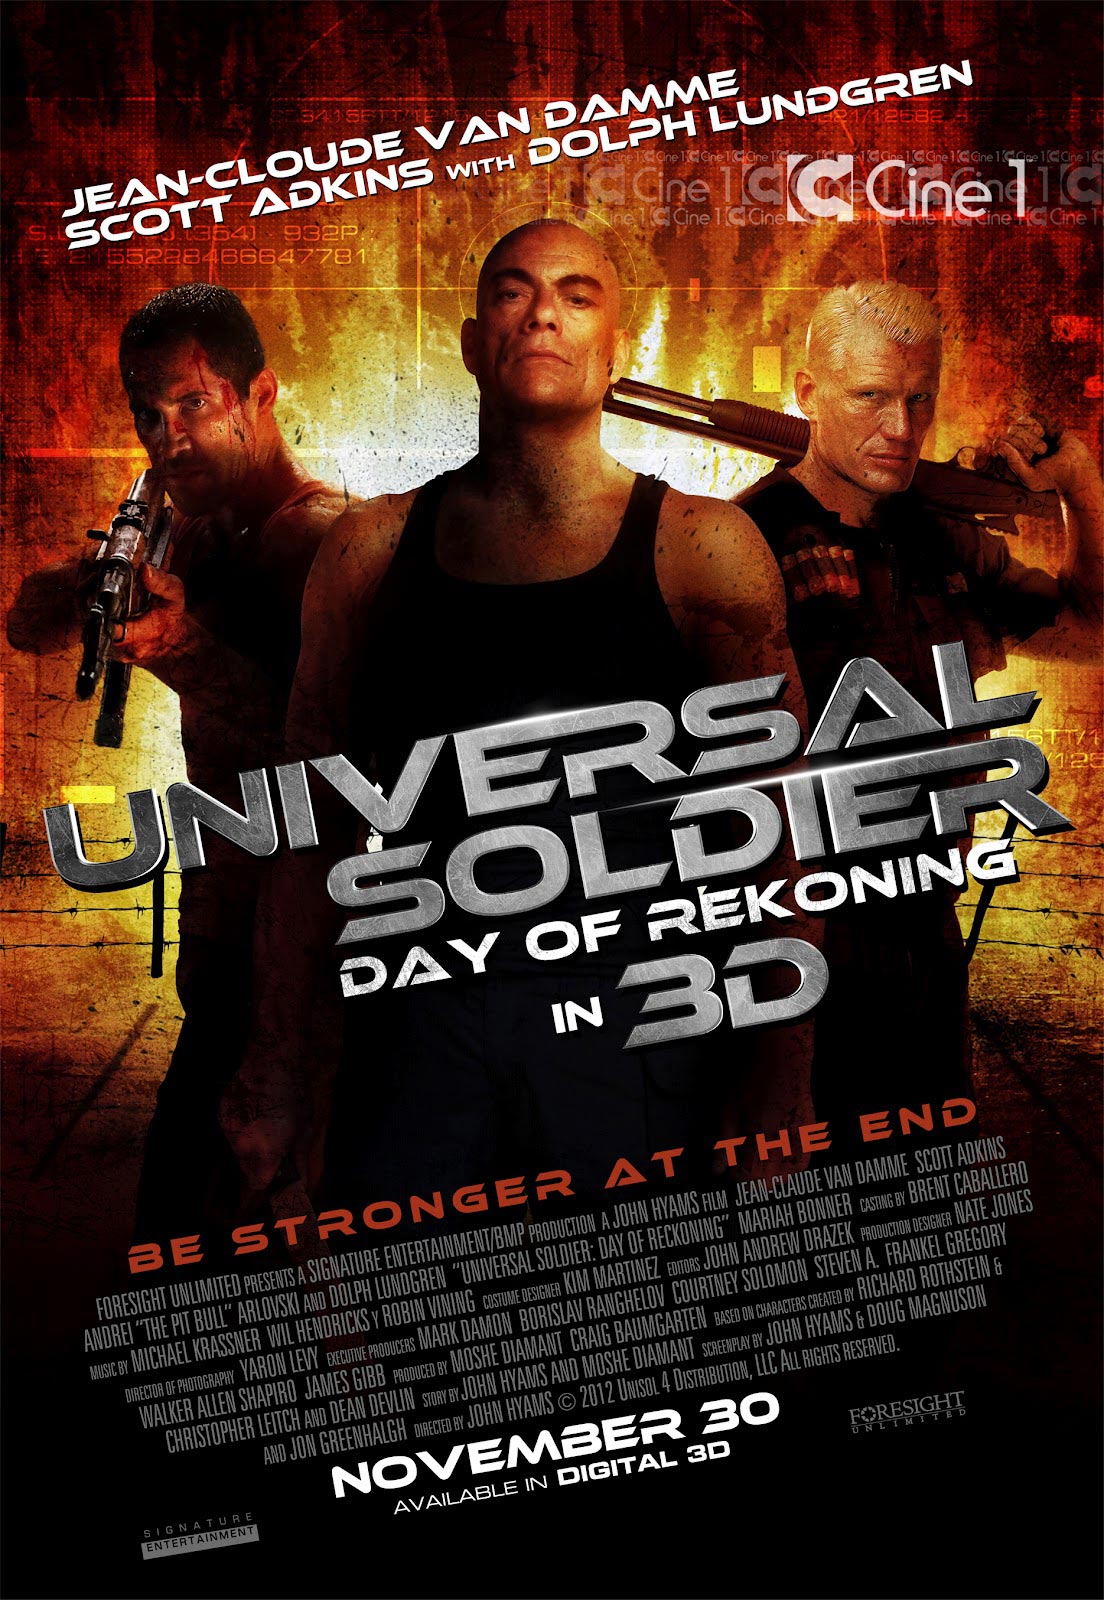 uump4.cc_再造战士4 Universal.Soldier.Day.Of.Reckoning.2012.720p.HDRiP.AC3-2.0-AXED 1.36G